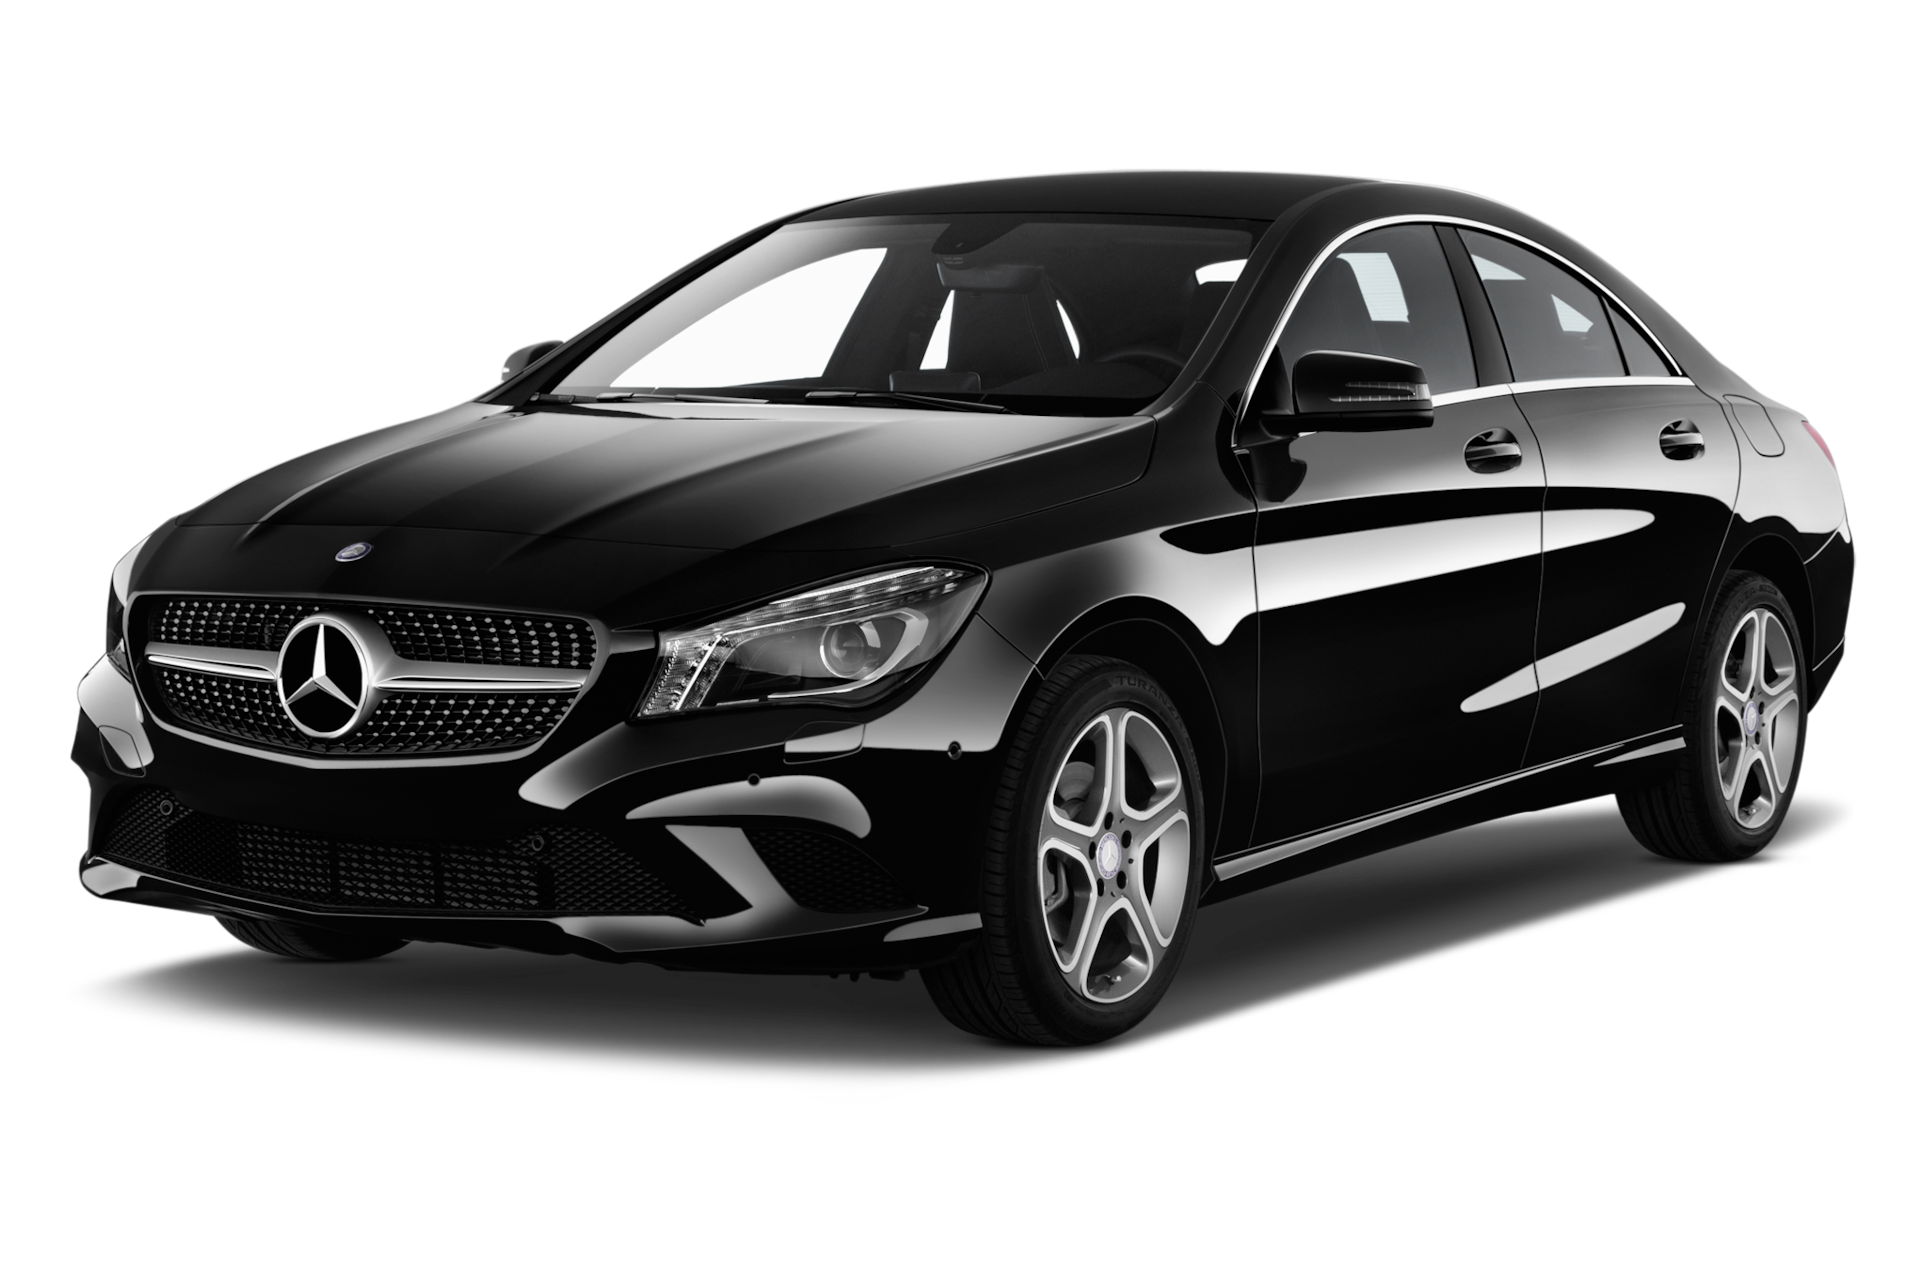 2015 Mercedes-Benz CLA-Class Prices, Reviews, and Photos - MotorTrend